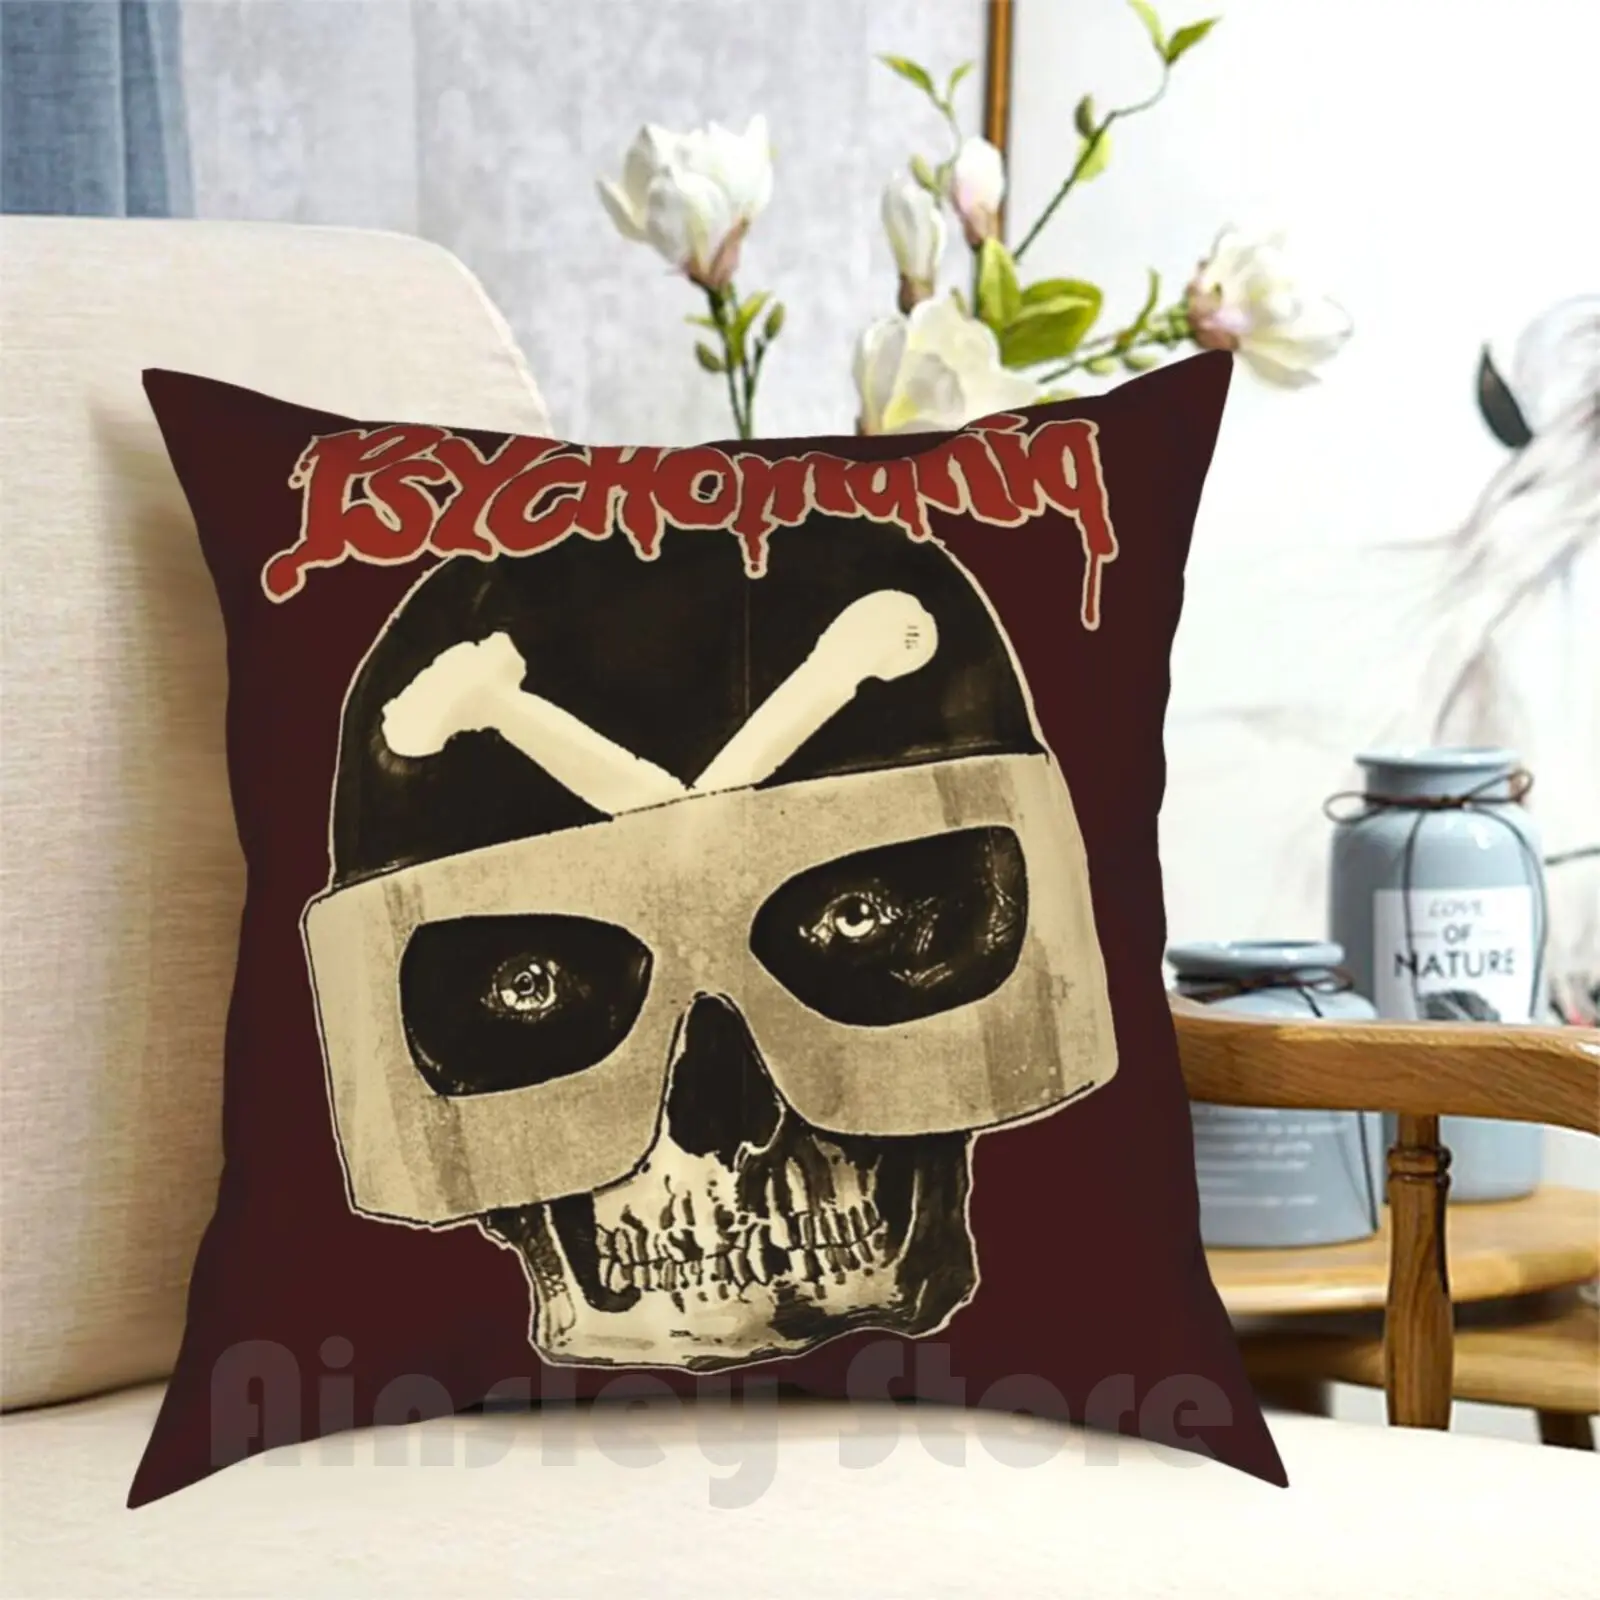 

Psychomania 1973 Pillow Case Printed Home Soft Throw Pillow Psychomania Horror Rider Vintage Cycle Movie Flick